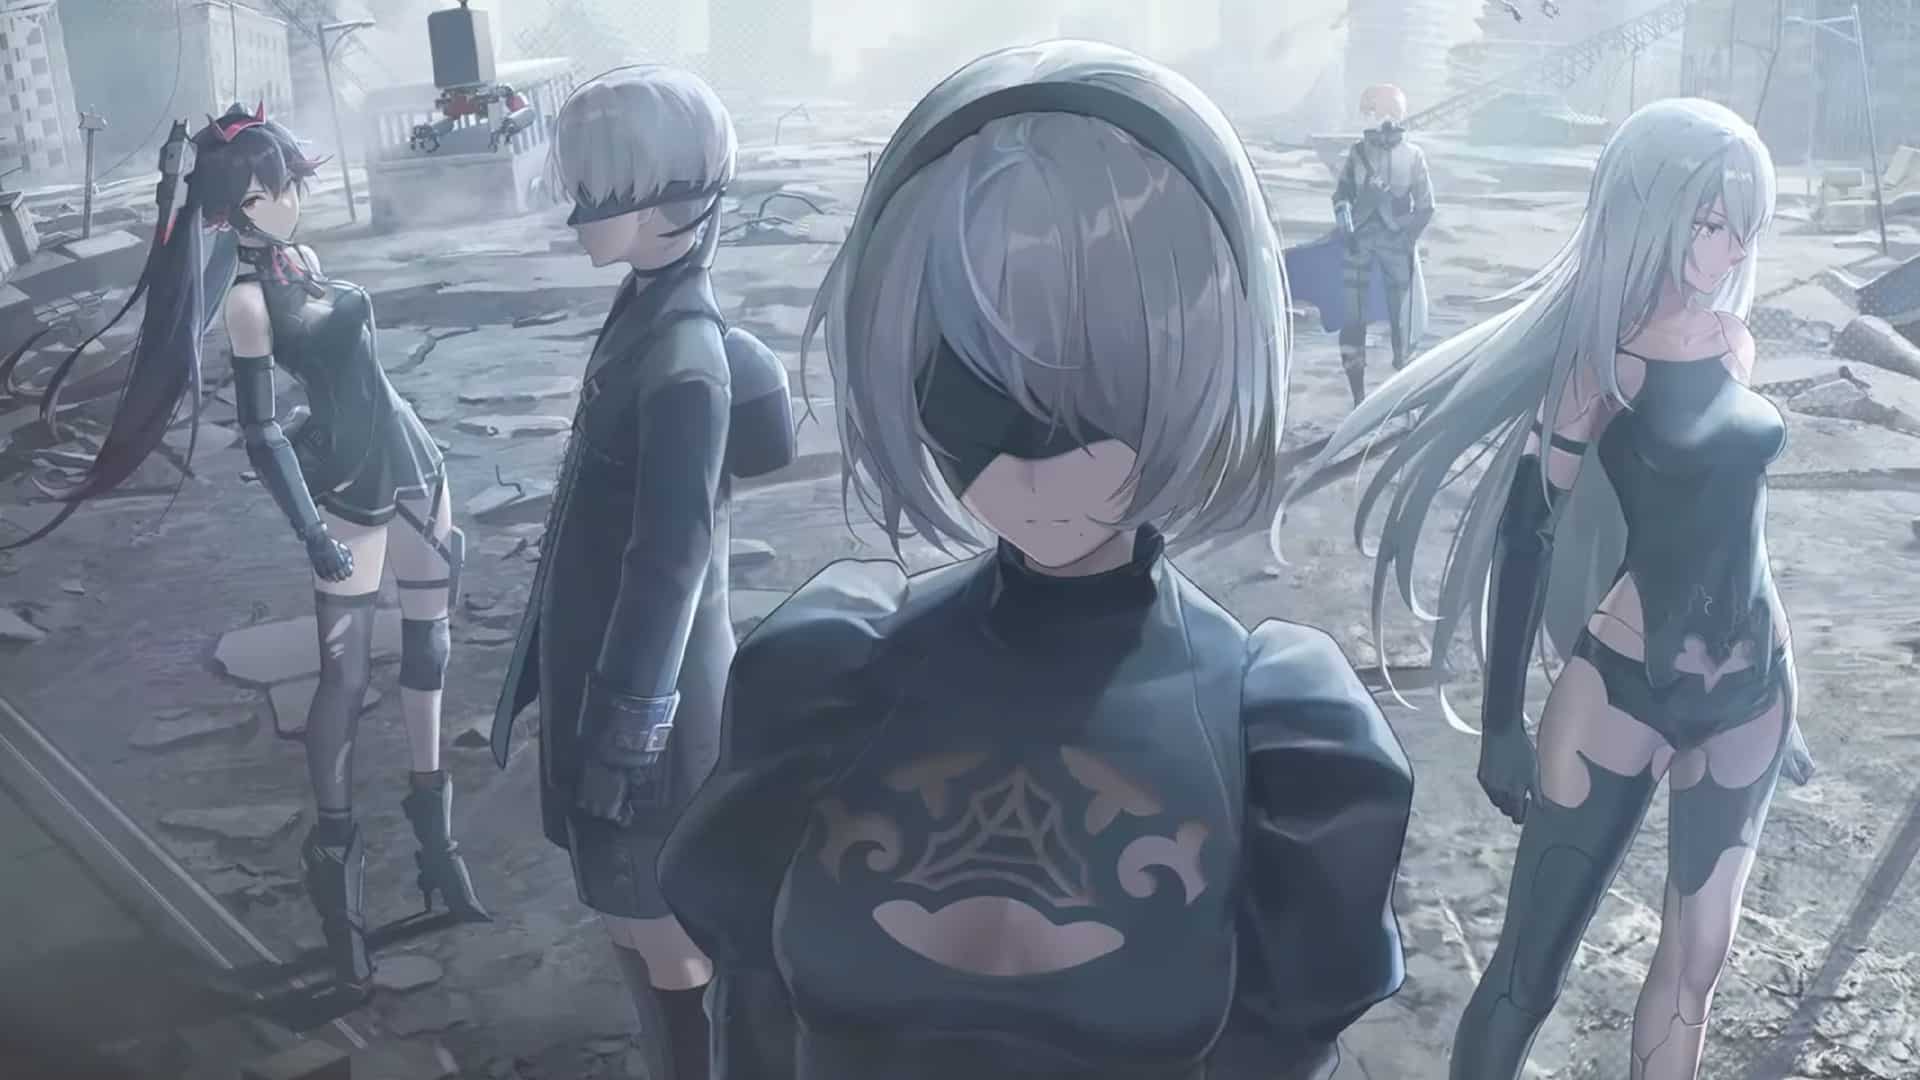 Punishing: Gray Raven Relaunches Collab With NieR:Automata Later This Week